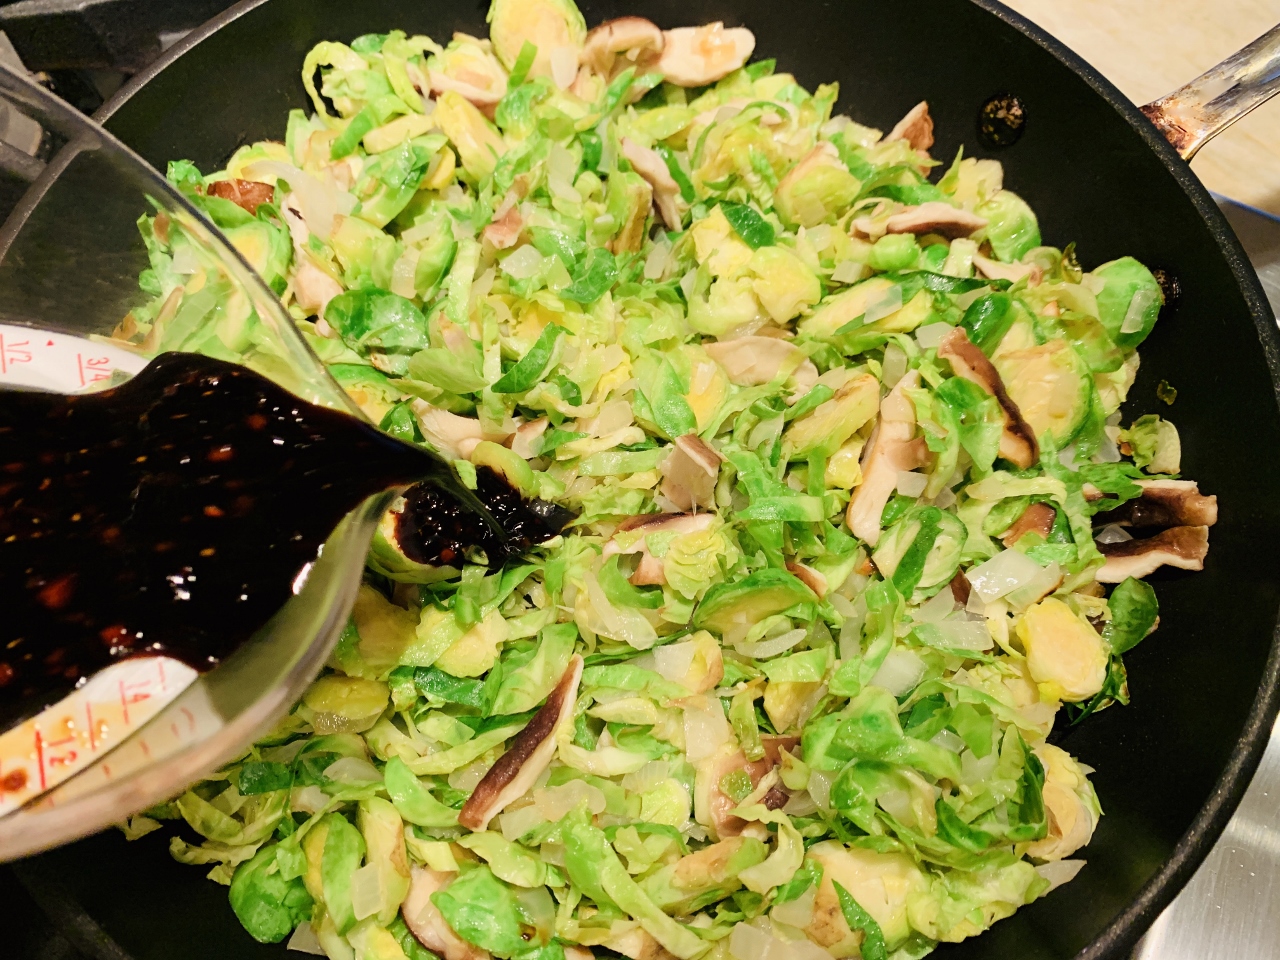 Shaved Brussels Sprouts & Shiitakes with Asian Flavors – Recipe! Image 4